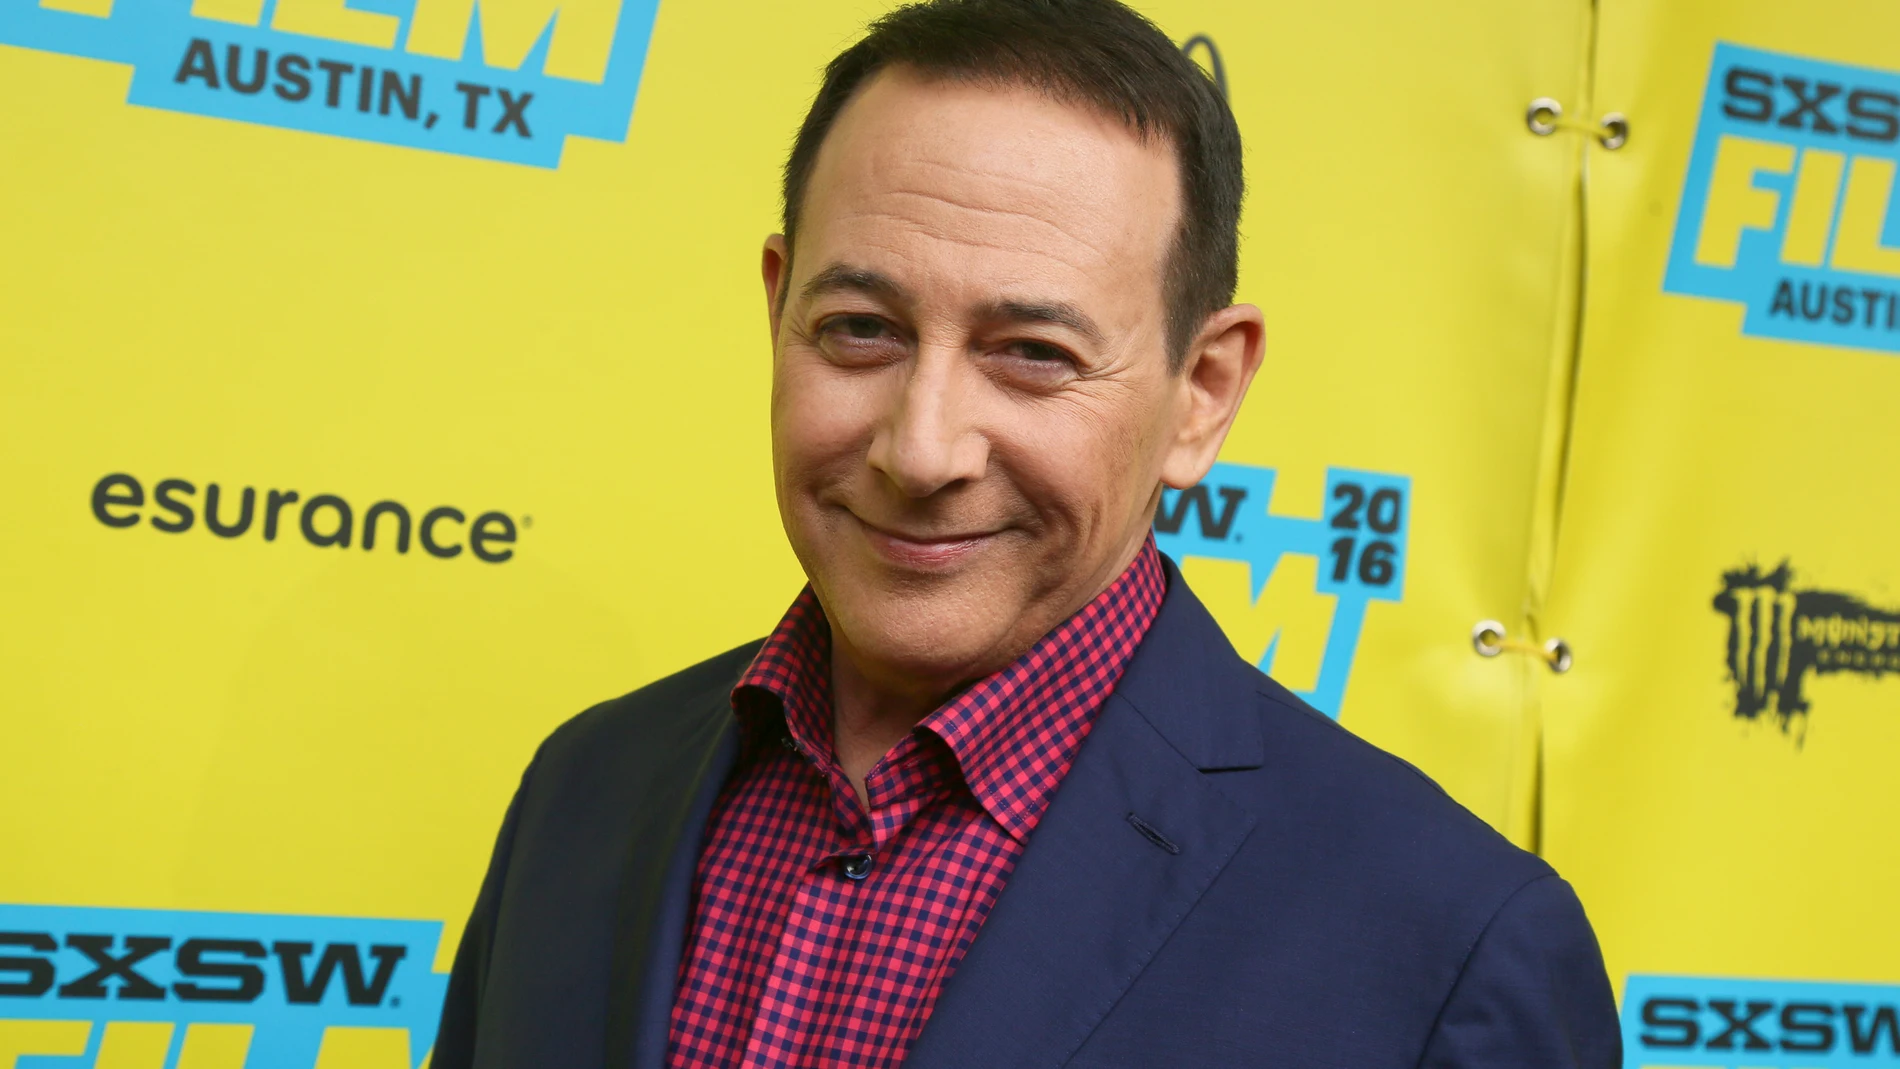 FILE - Paul Reubens attends the world premiere of "Pee-wee's Big Holiday" during the South by Southwest Film Festival on Thursday, March 17, 2016, in Austin, Texas. Reubens died Sunday night after a six-year struggle with cancer that he did not make public, his publicist said in a statement. (Photo by Jack Plunkett/Invision/AP, File)